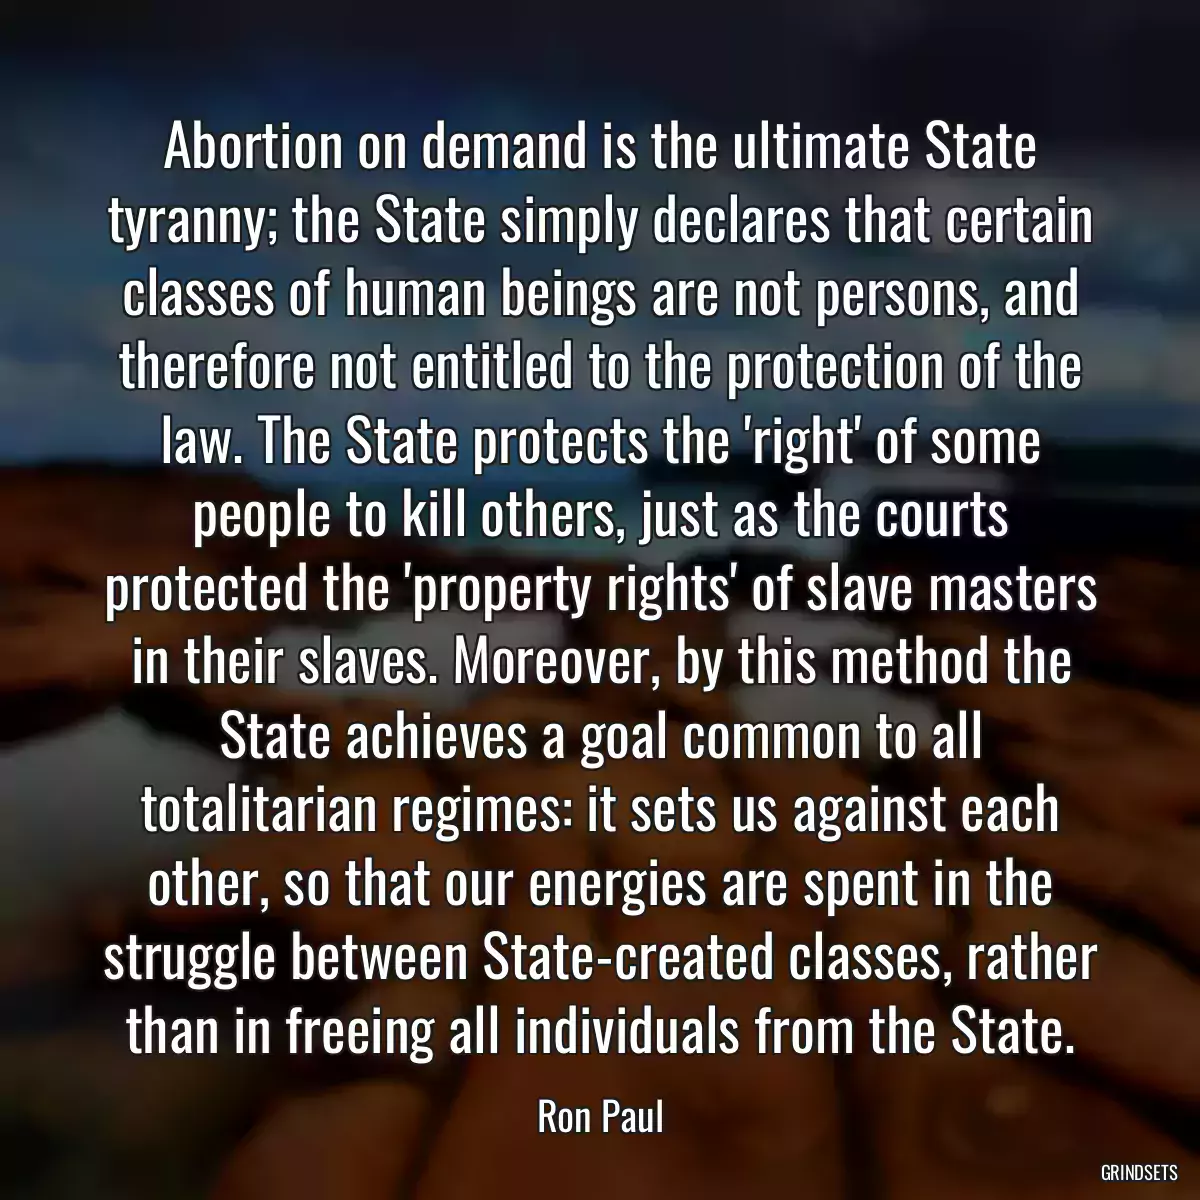 Abortion on demand is the ultimate State tyranny; the State simply declares that certain classes of human beings are not persons, and therefore not entitled to the protection of the law. The State protects the \'right\' of some people to kill others, just as the courts protected the \'property rights\' of slave masters in their slaves. Moreover, by this method the State achieves a goal common to all totalitarian regimes: it sets us against each other, so that our energies are spent in the struggle between State-created classes, rather than in freeing all individuals from the State.